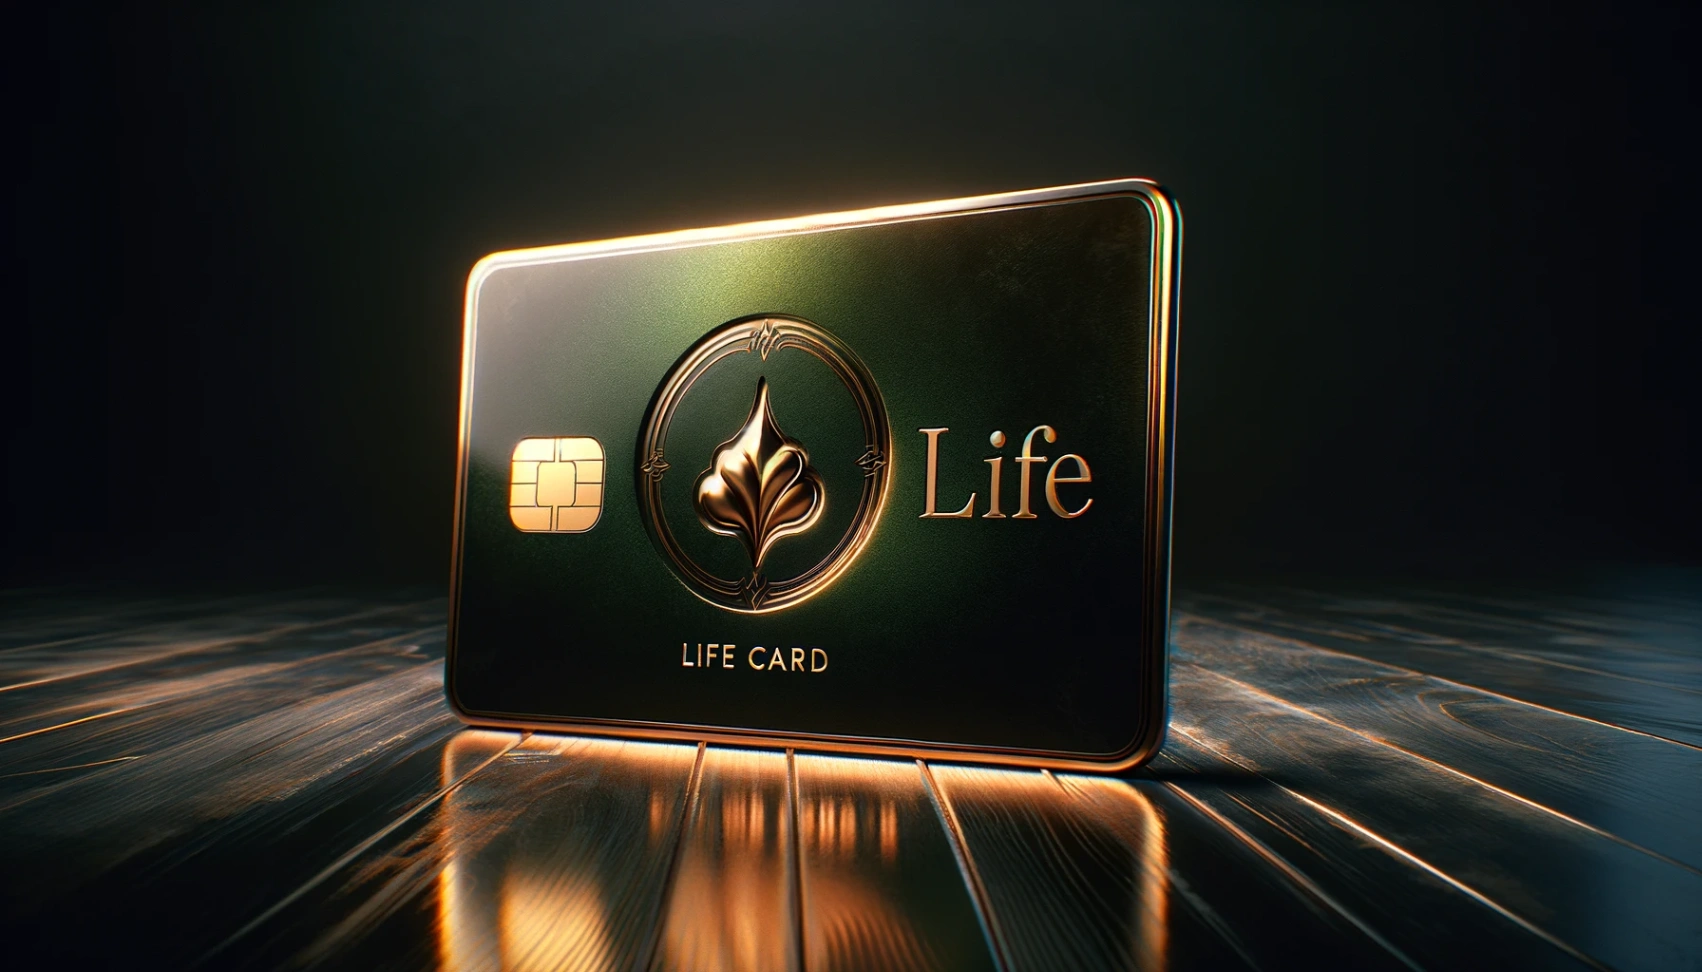 Life Card: Learn How to Apply With a Clear Step-by-Step